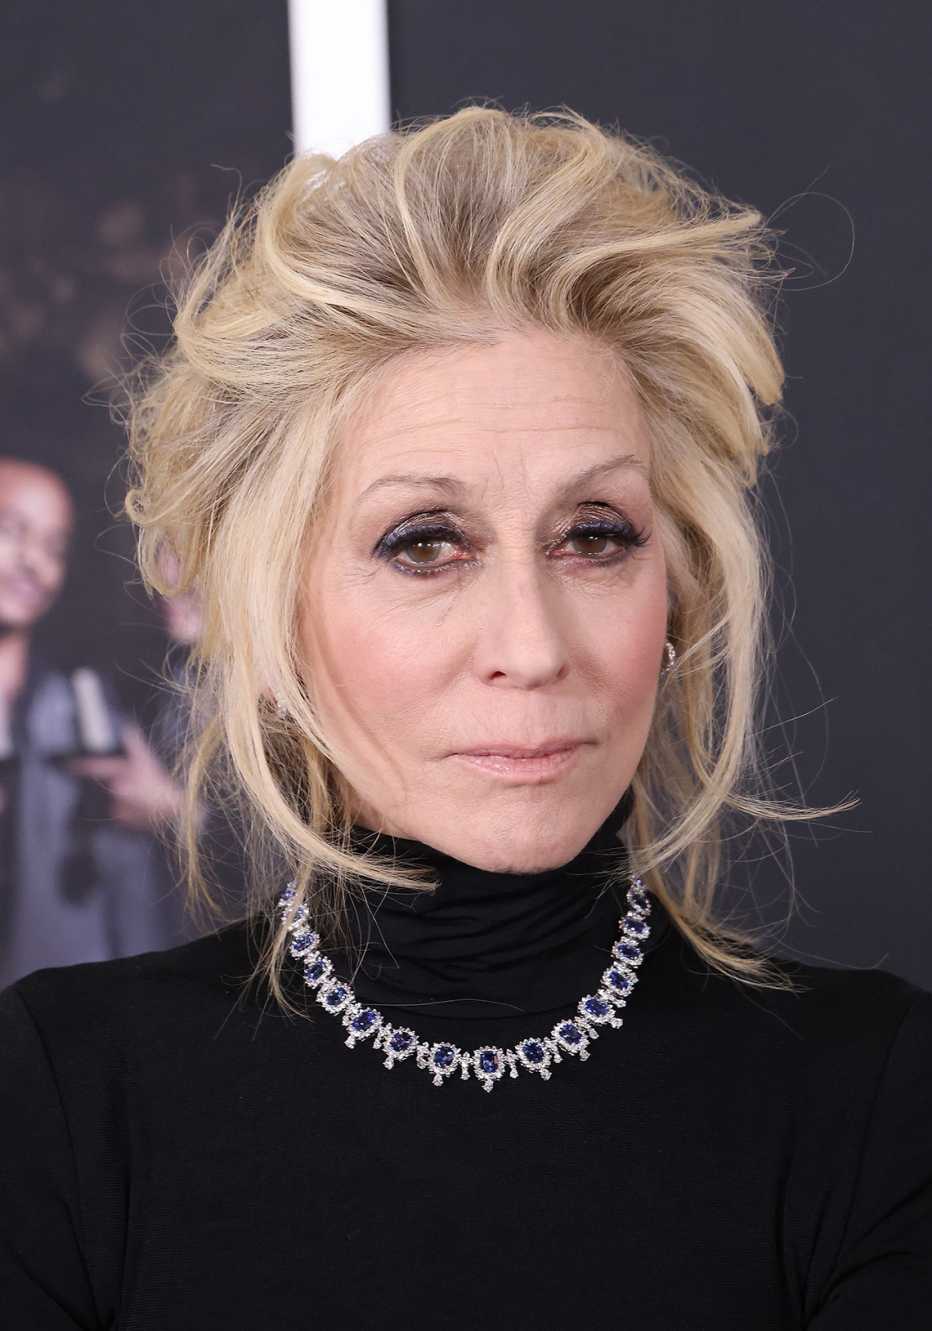 Judith Light attends the New York premiere of The Menu